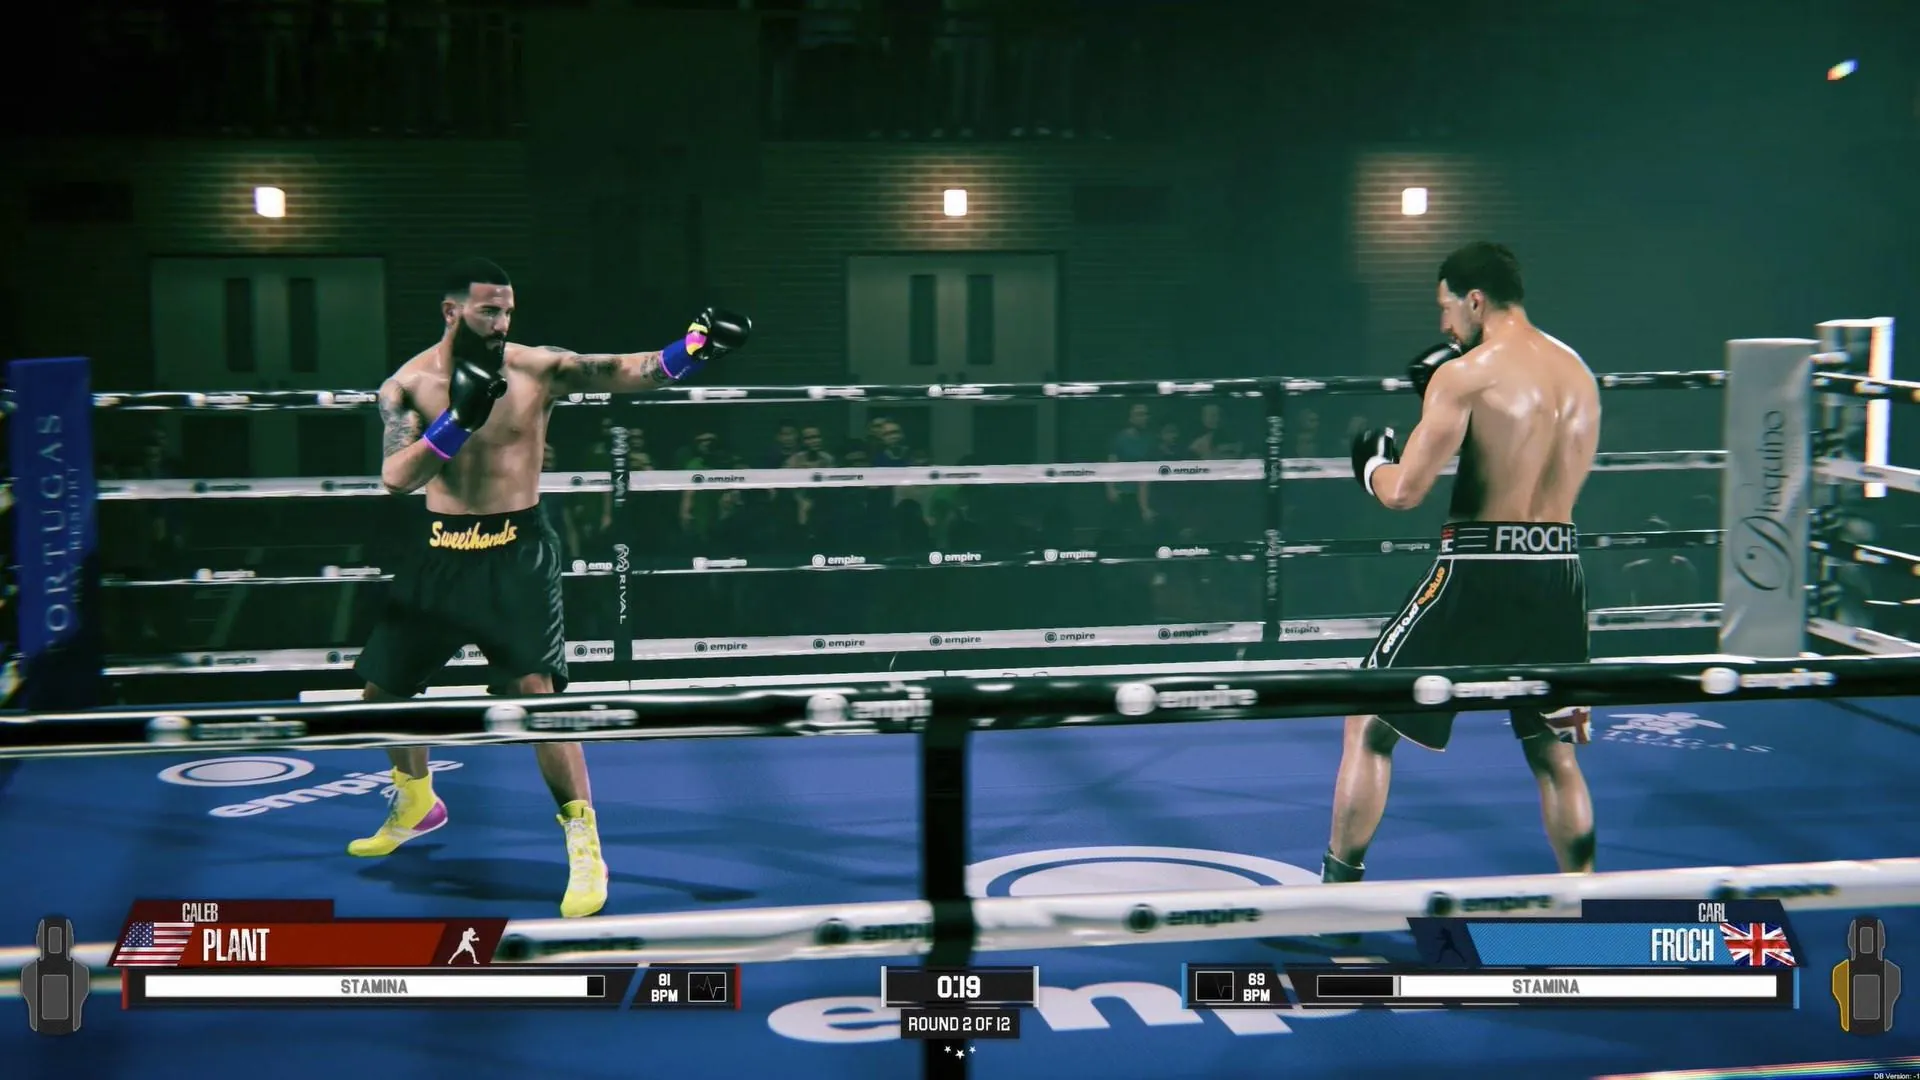 How To Download The Undisputed Boxing Game Beta